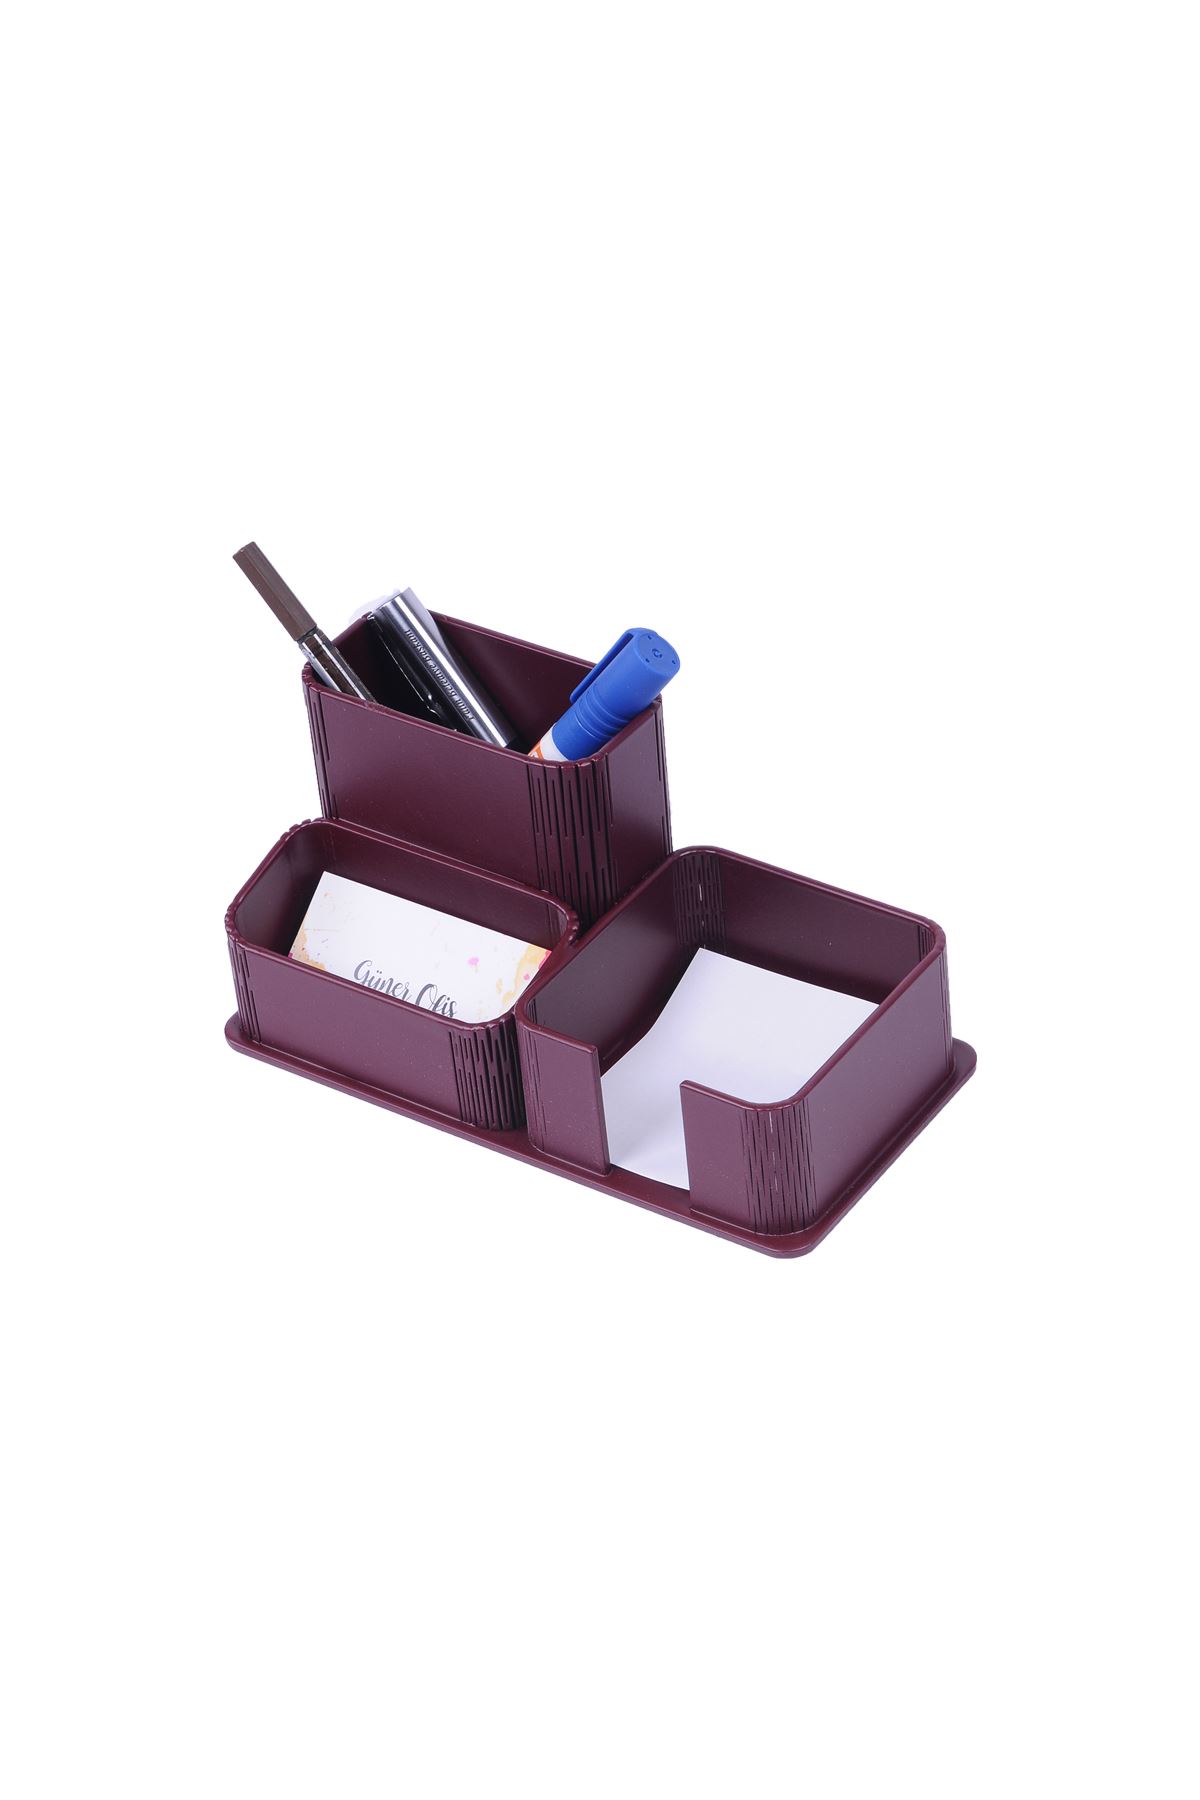 Double Document Tray With 2 Accessories Gray| Desk Set Accessories | Desktop Accessories | Desk Accessories | Desk Organizers